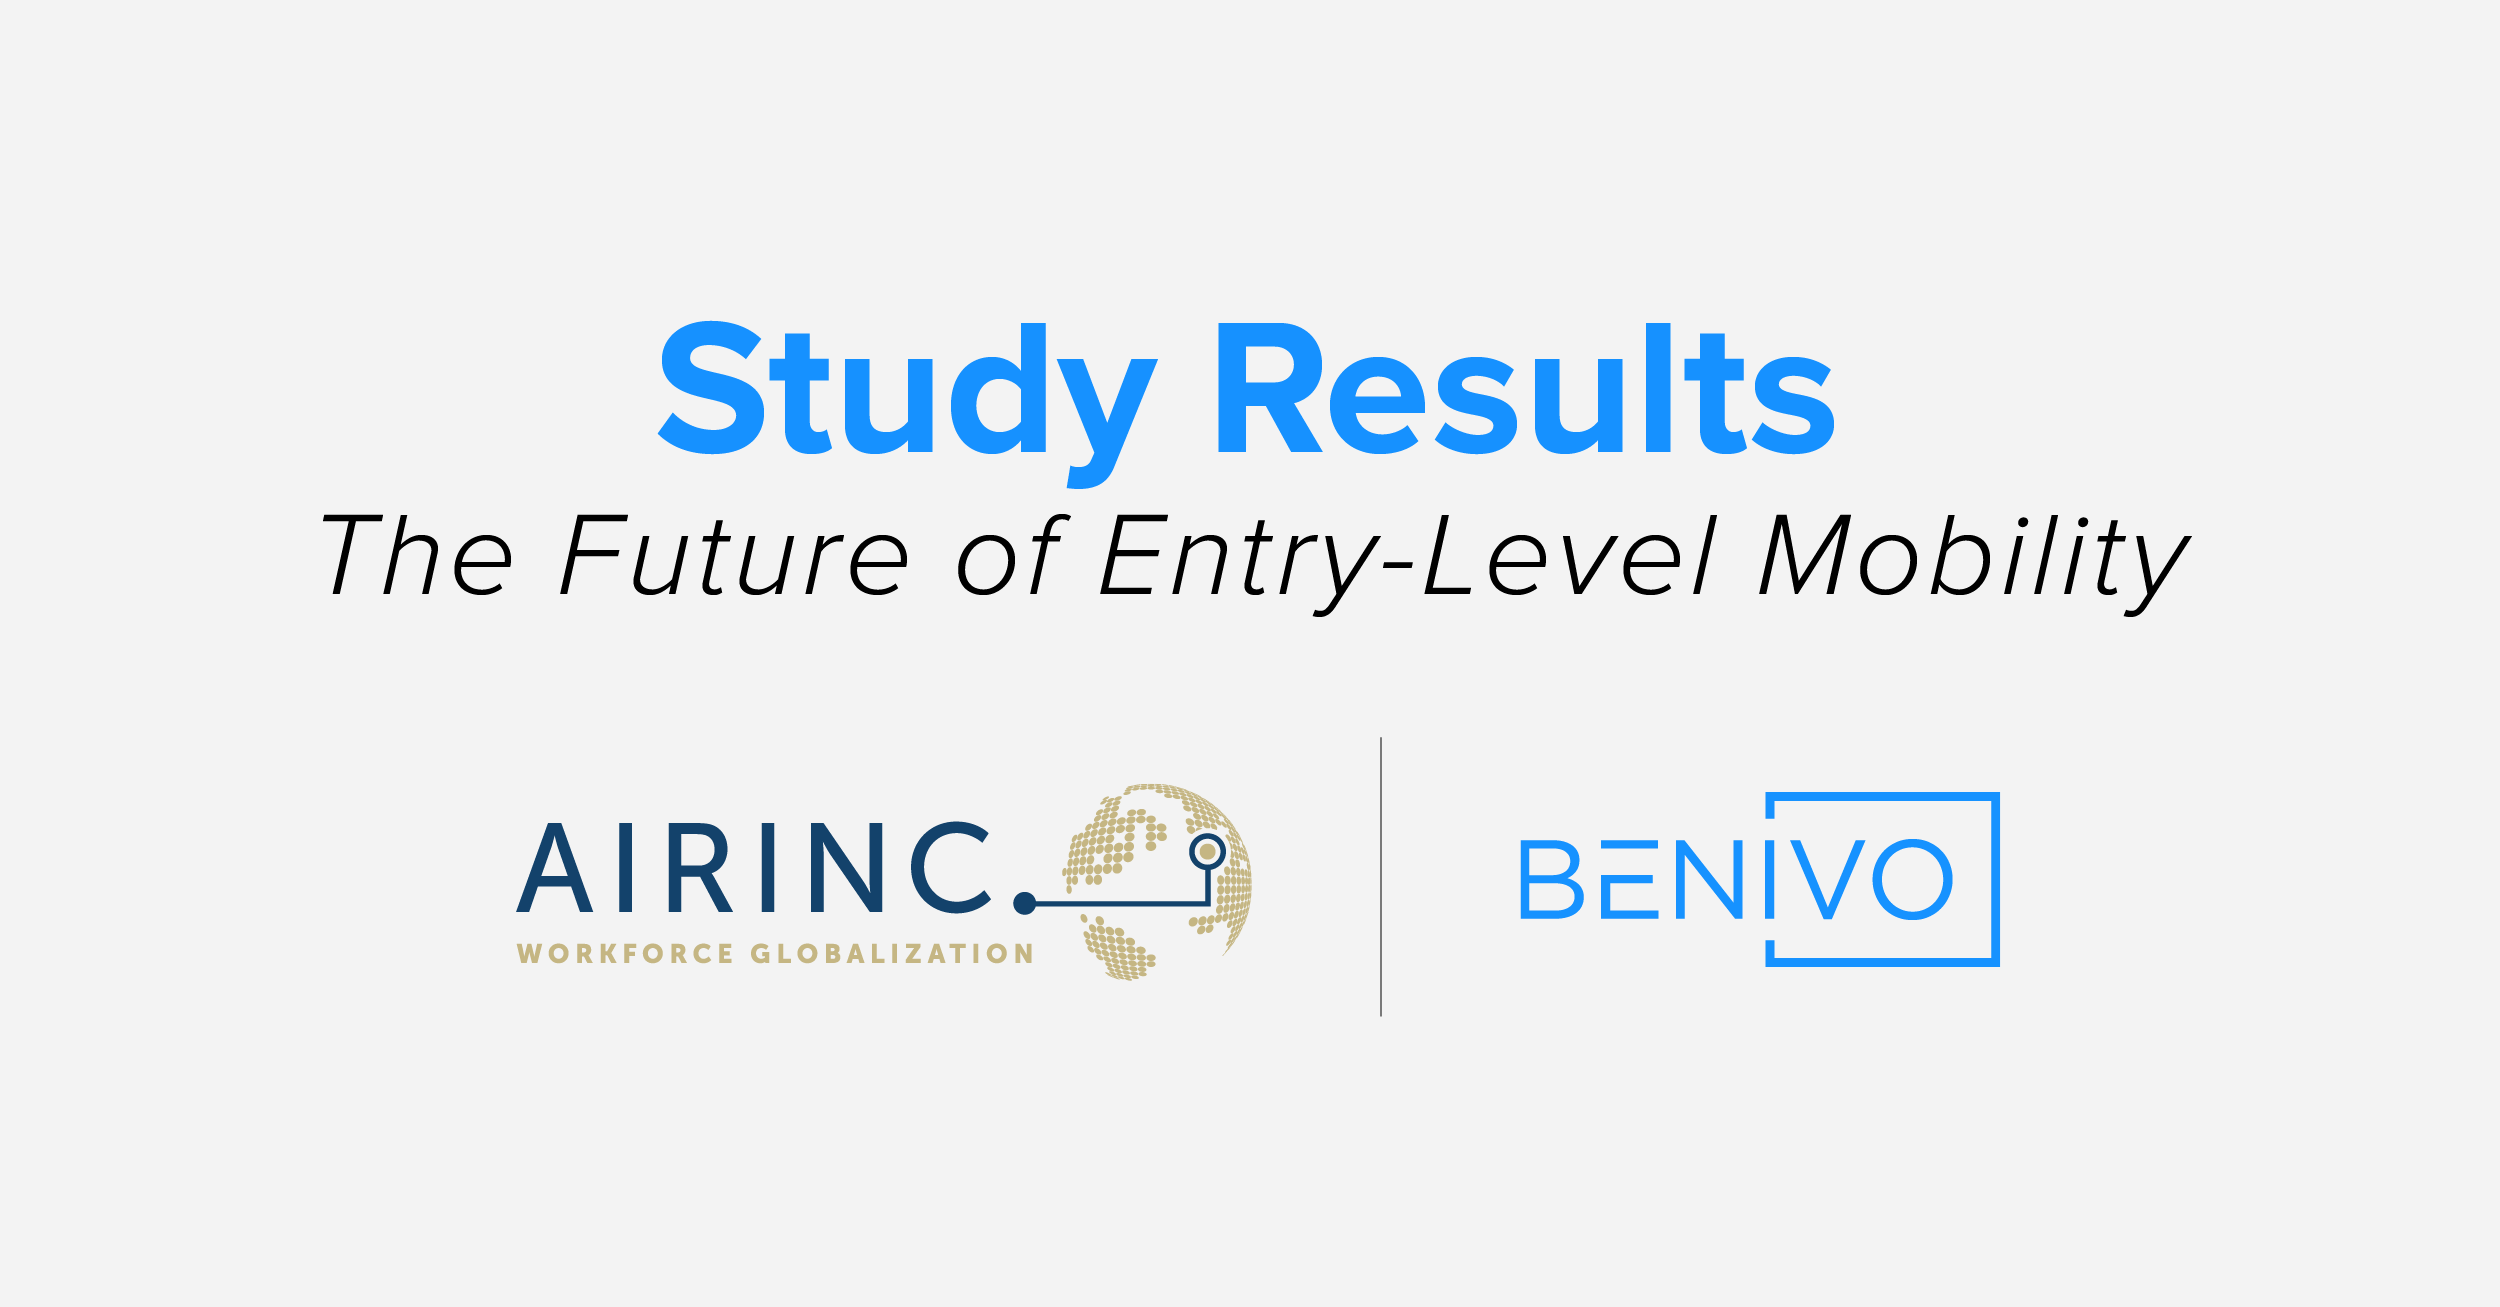 Study Results - The Future of Entry-Level Mobility by AIRINC and Benivo